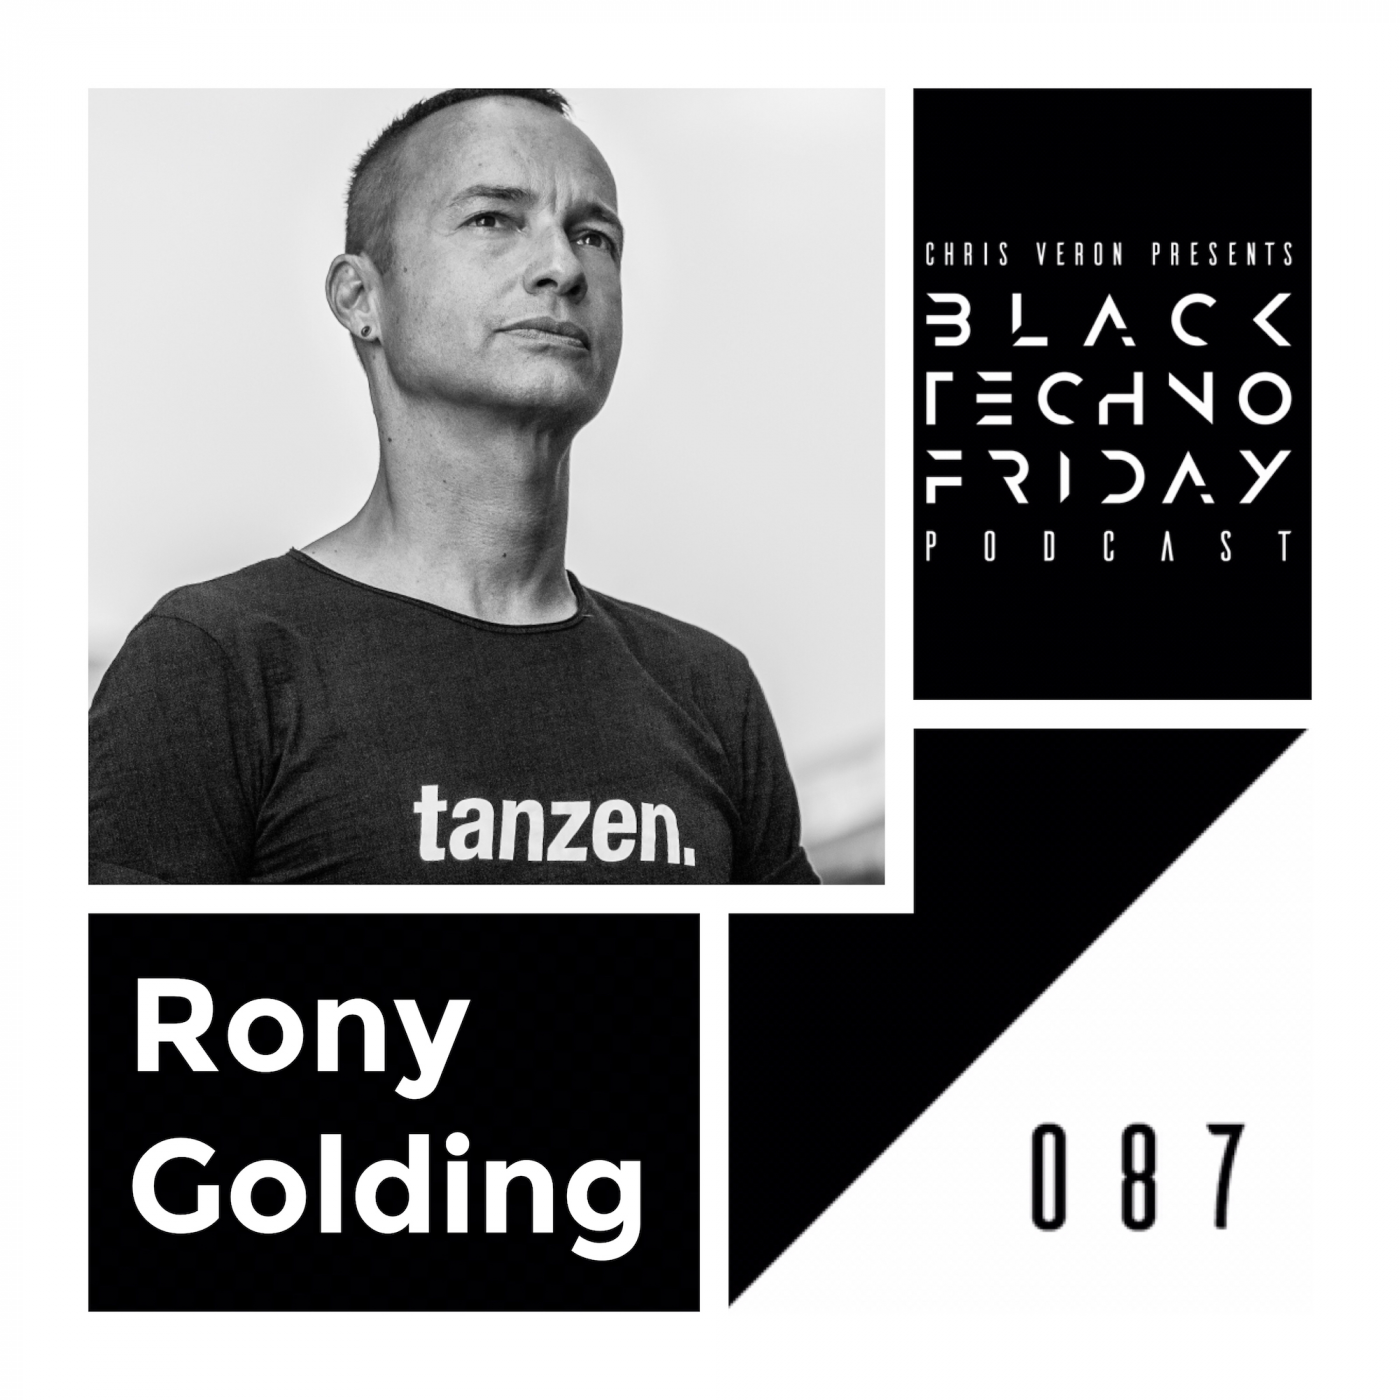 Black TECHNO Friday Podcast 087 | Rony Golding (Funk'n Deep/Oscuro/Eclipse)